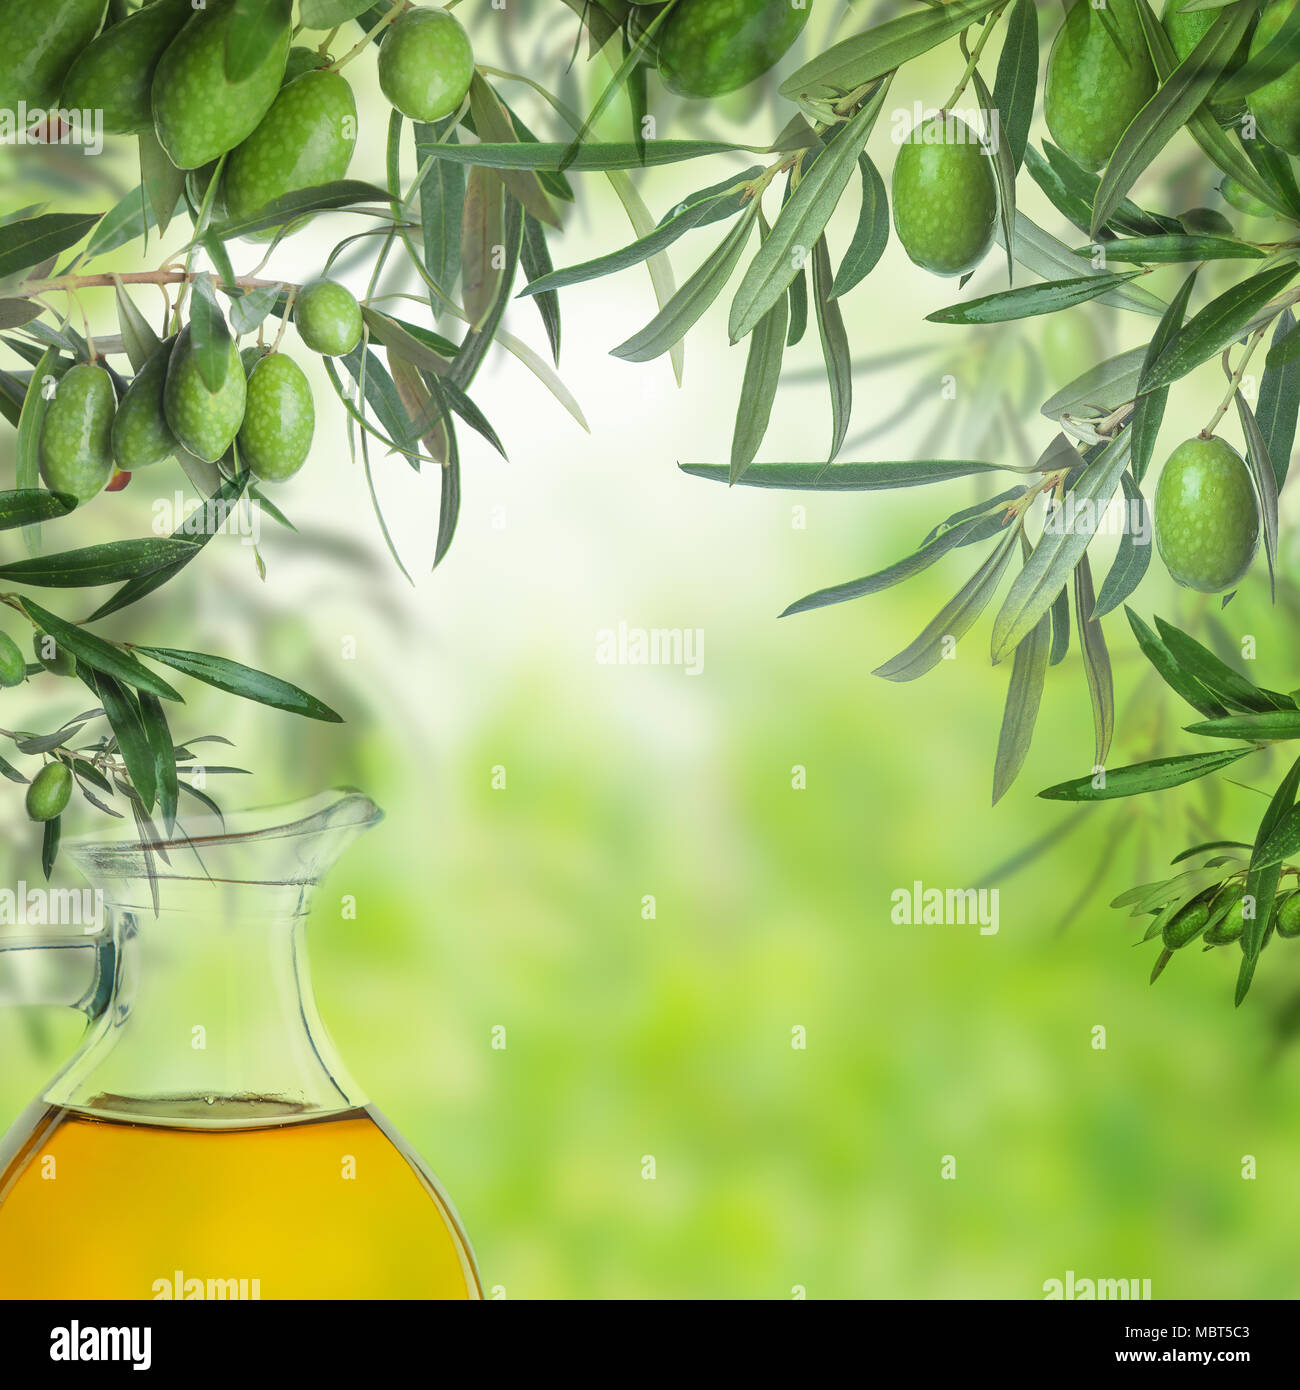 Olive oil bottle and green olive tree leaves on abstract green background  Stock Photo - Alamy